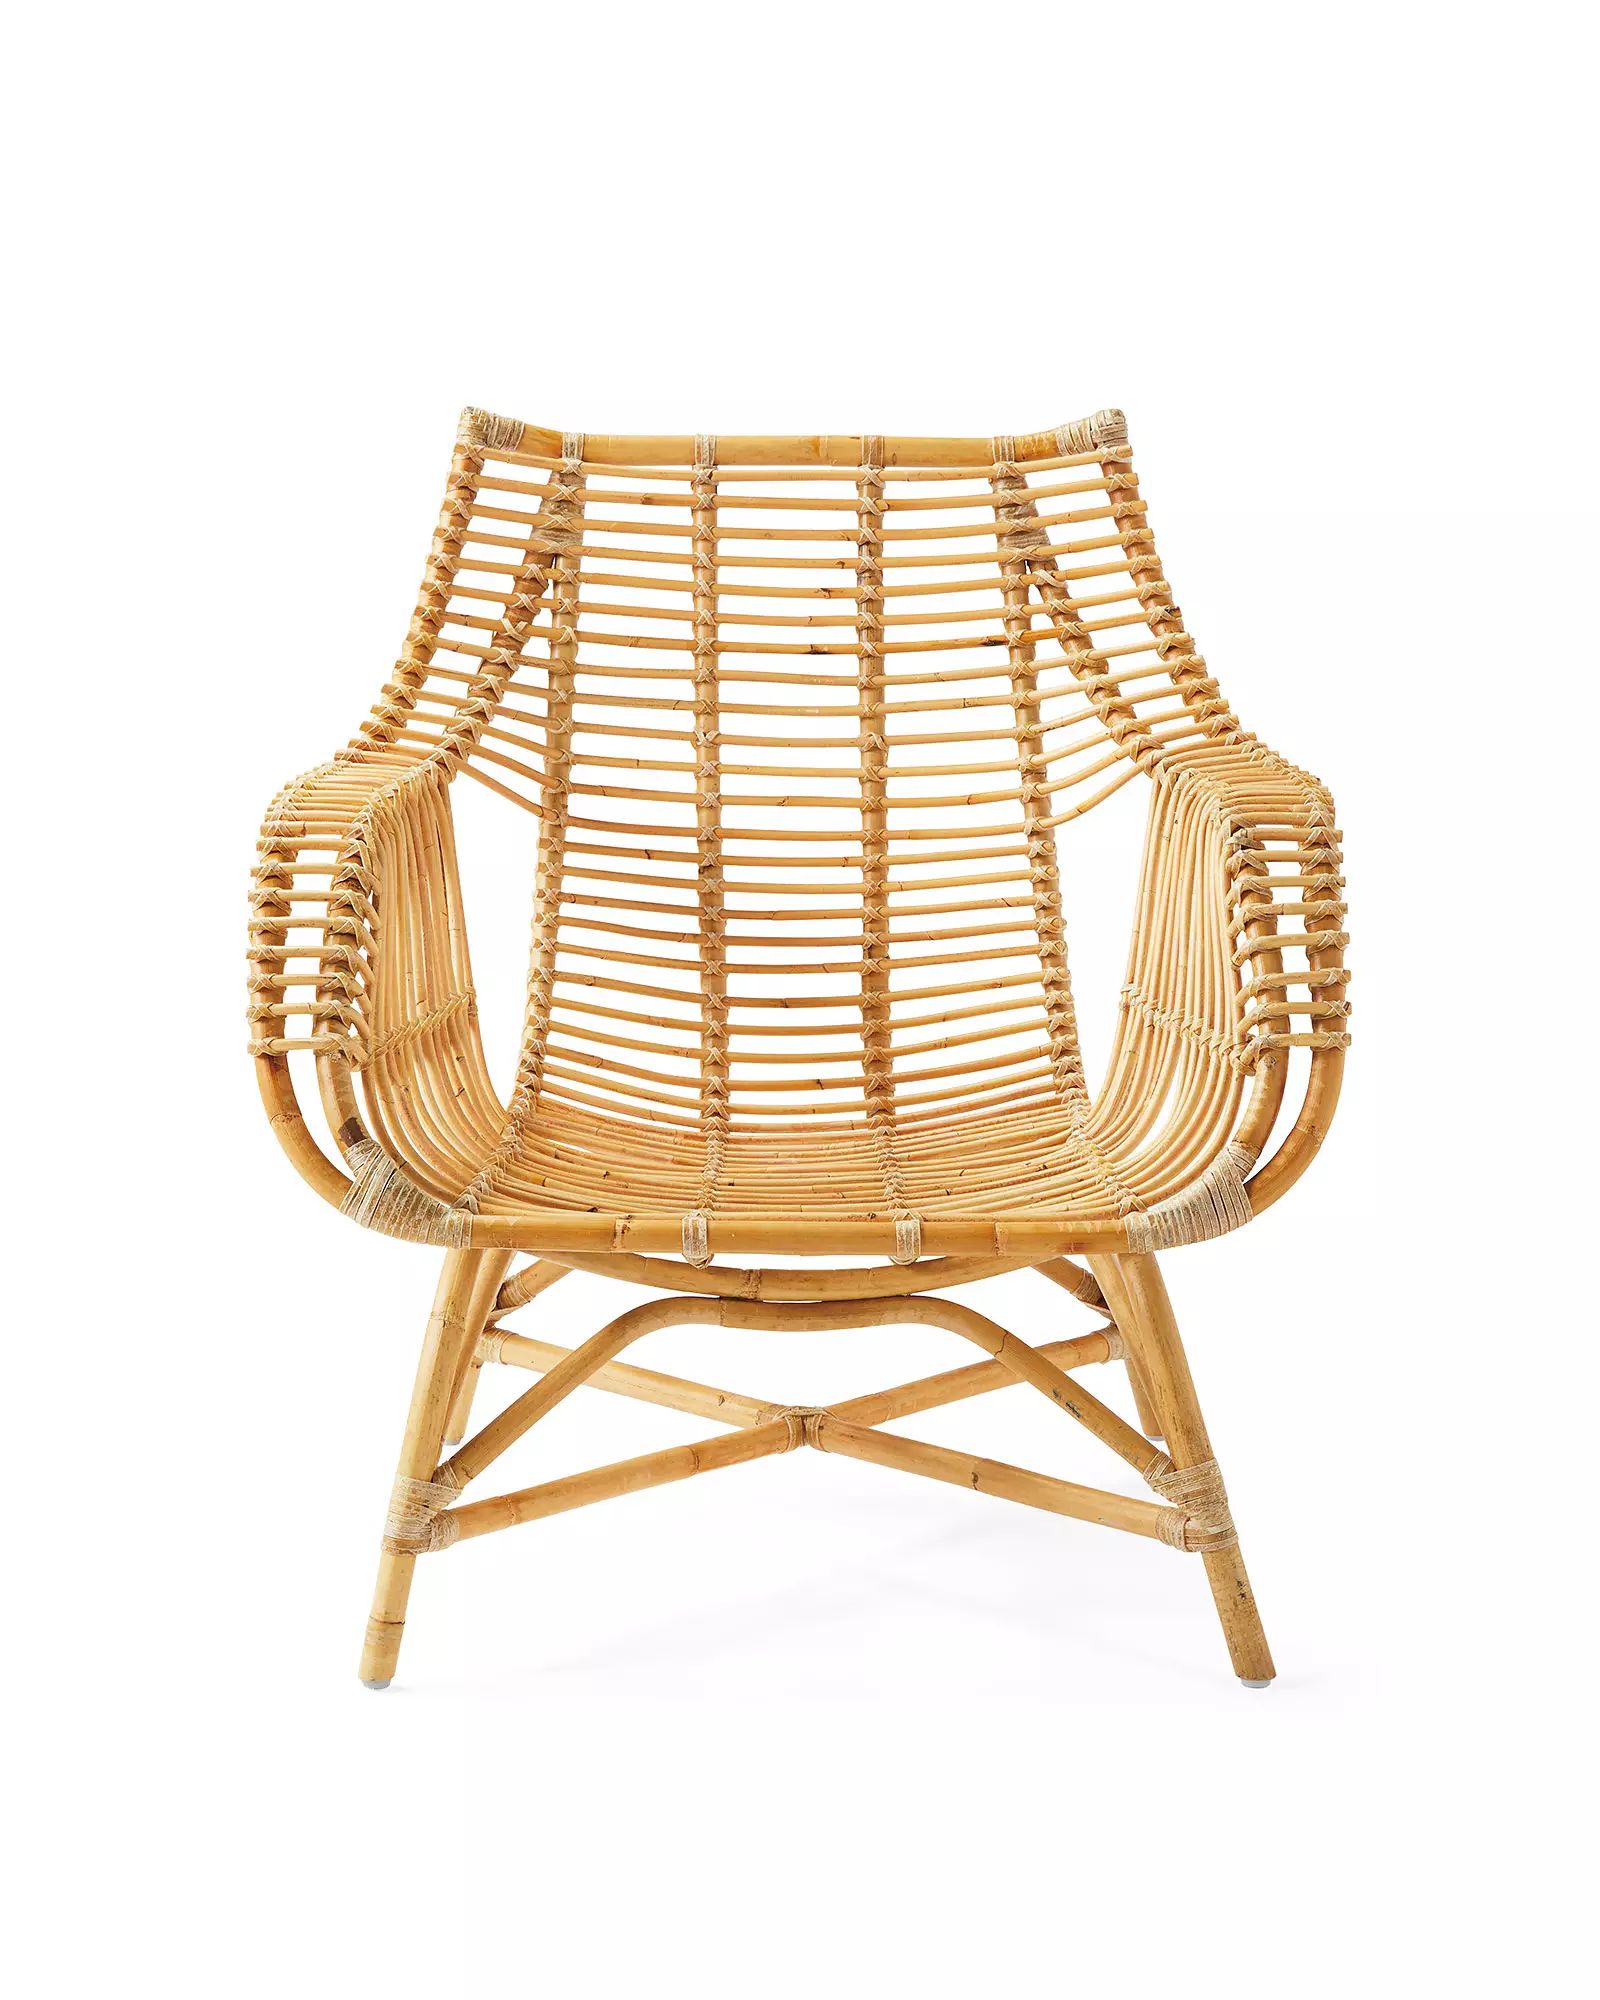 Venice Rattan Chair | Serena and Lily